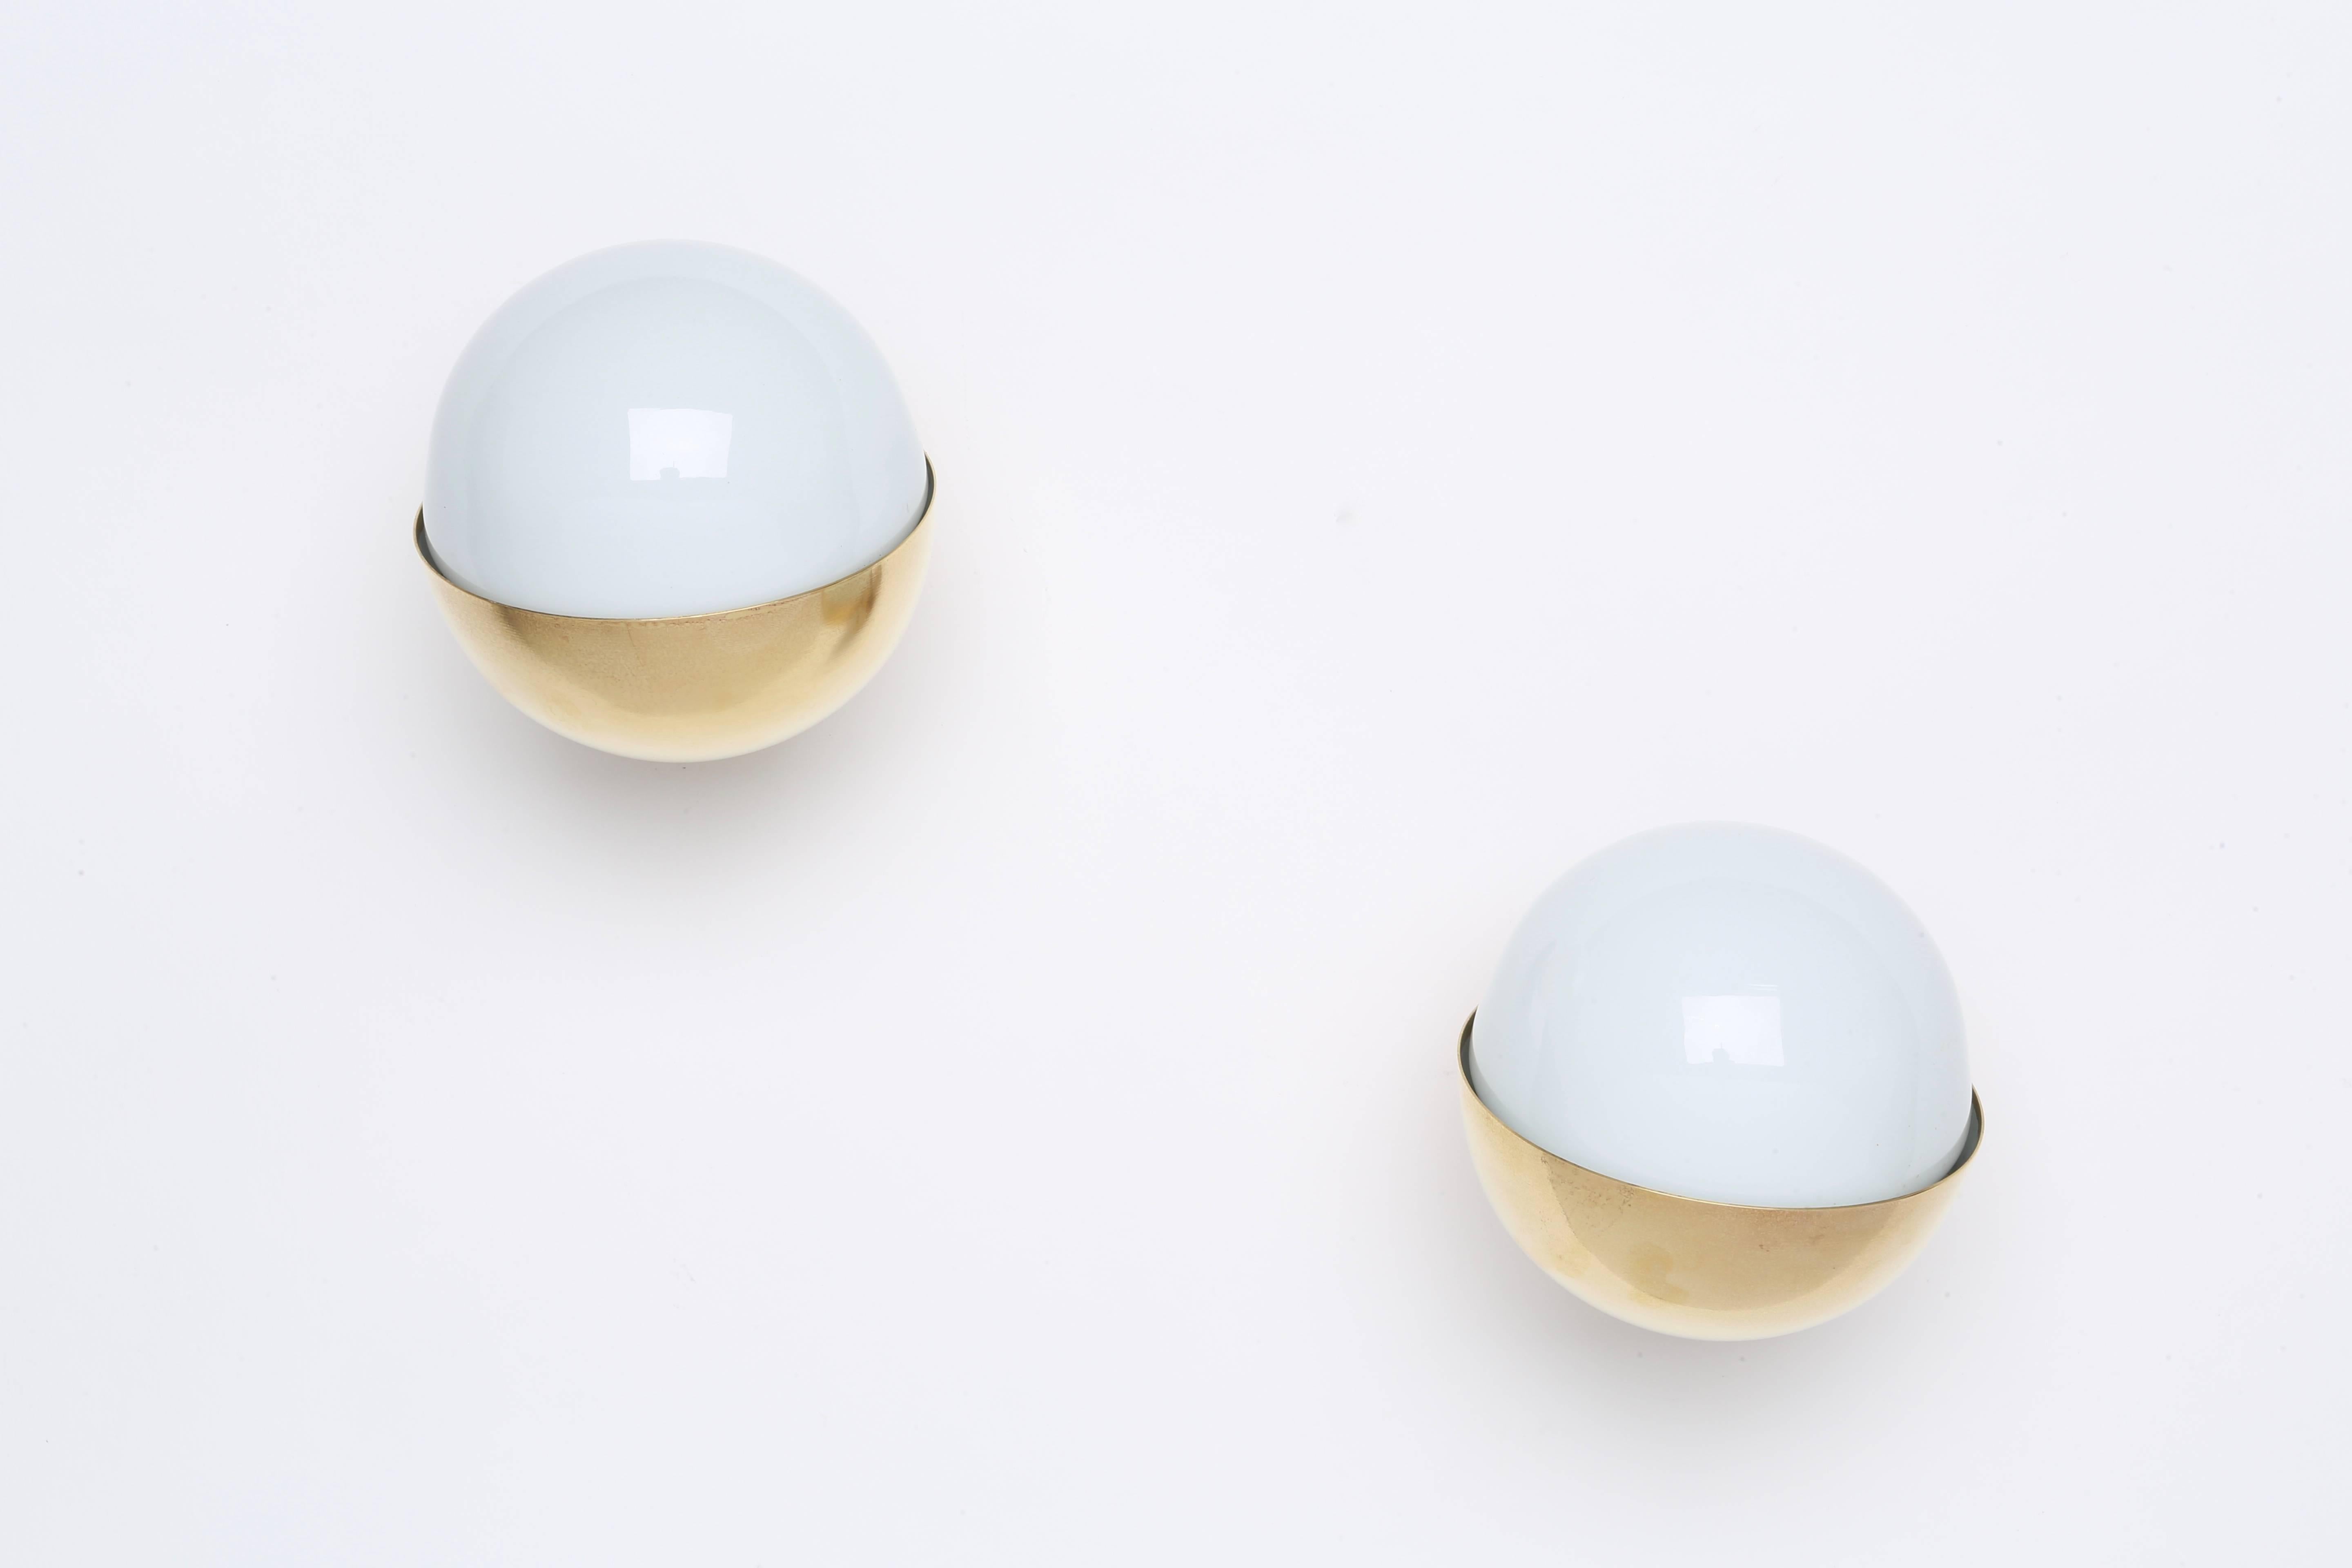 Pair of wall lamps designed by Danish architect Vilhelm Lauritzen for the Broadcasting House in Copenhagen.
Made by Louis Poulsen.
Brass and opaline glass.
 